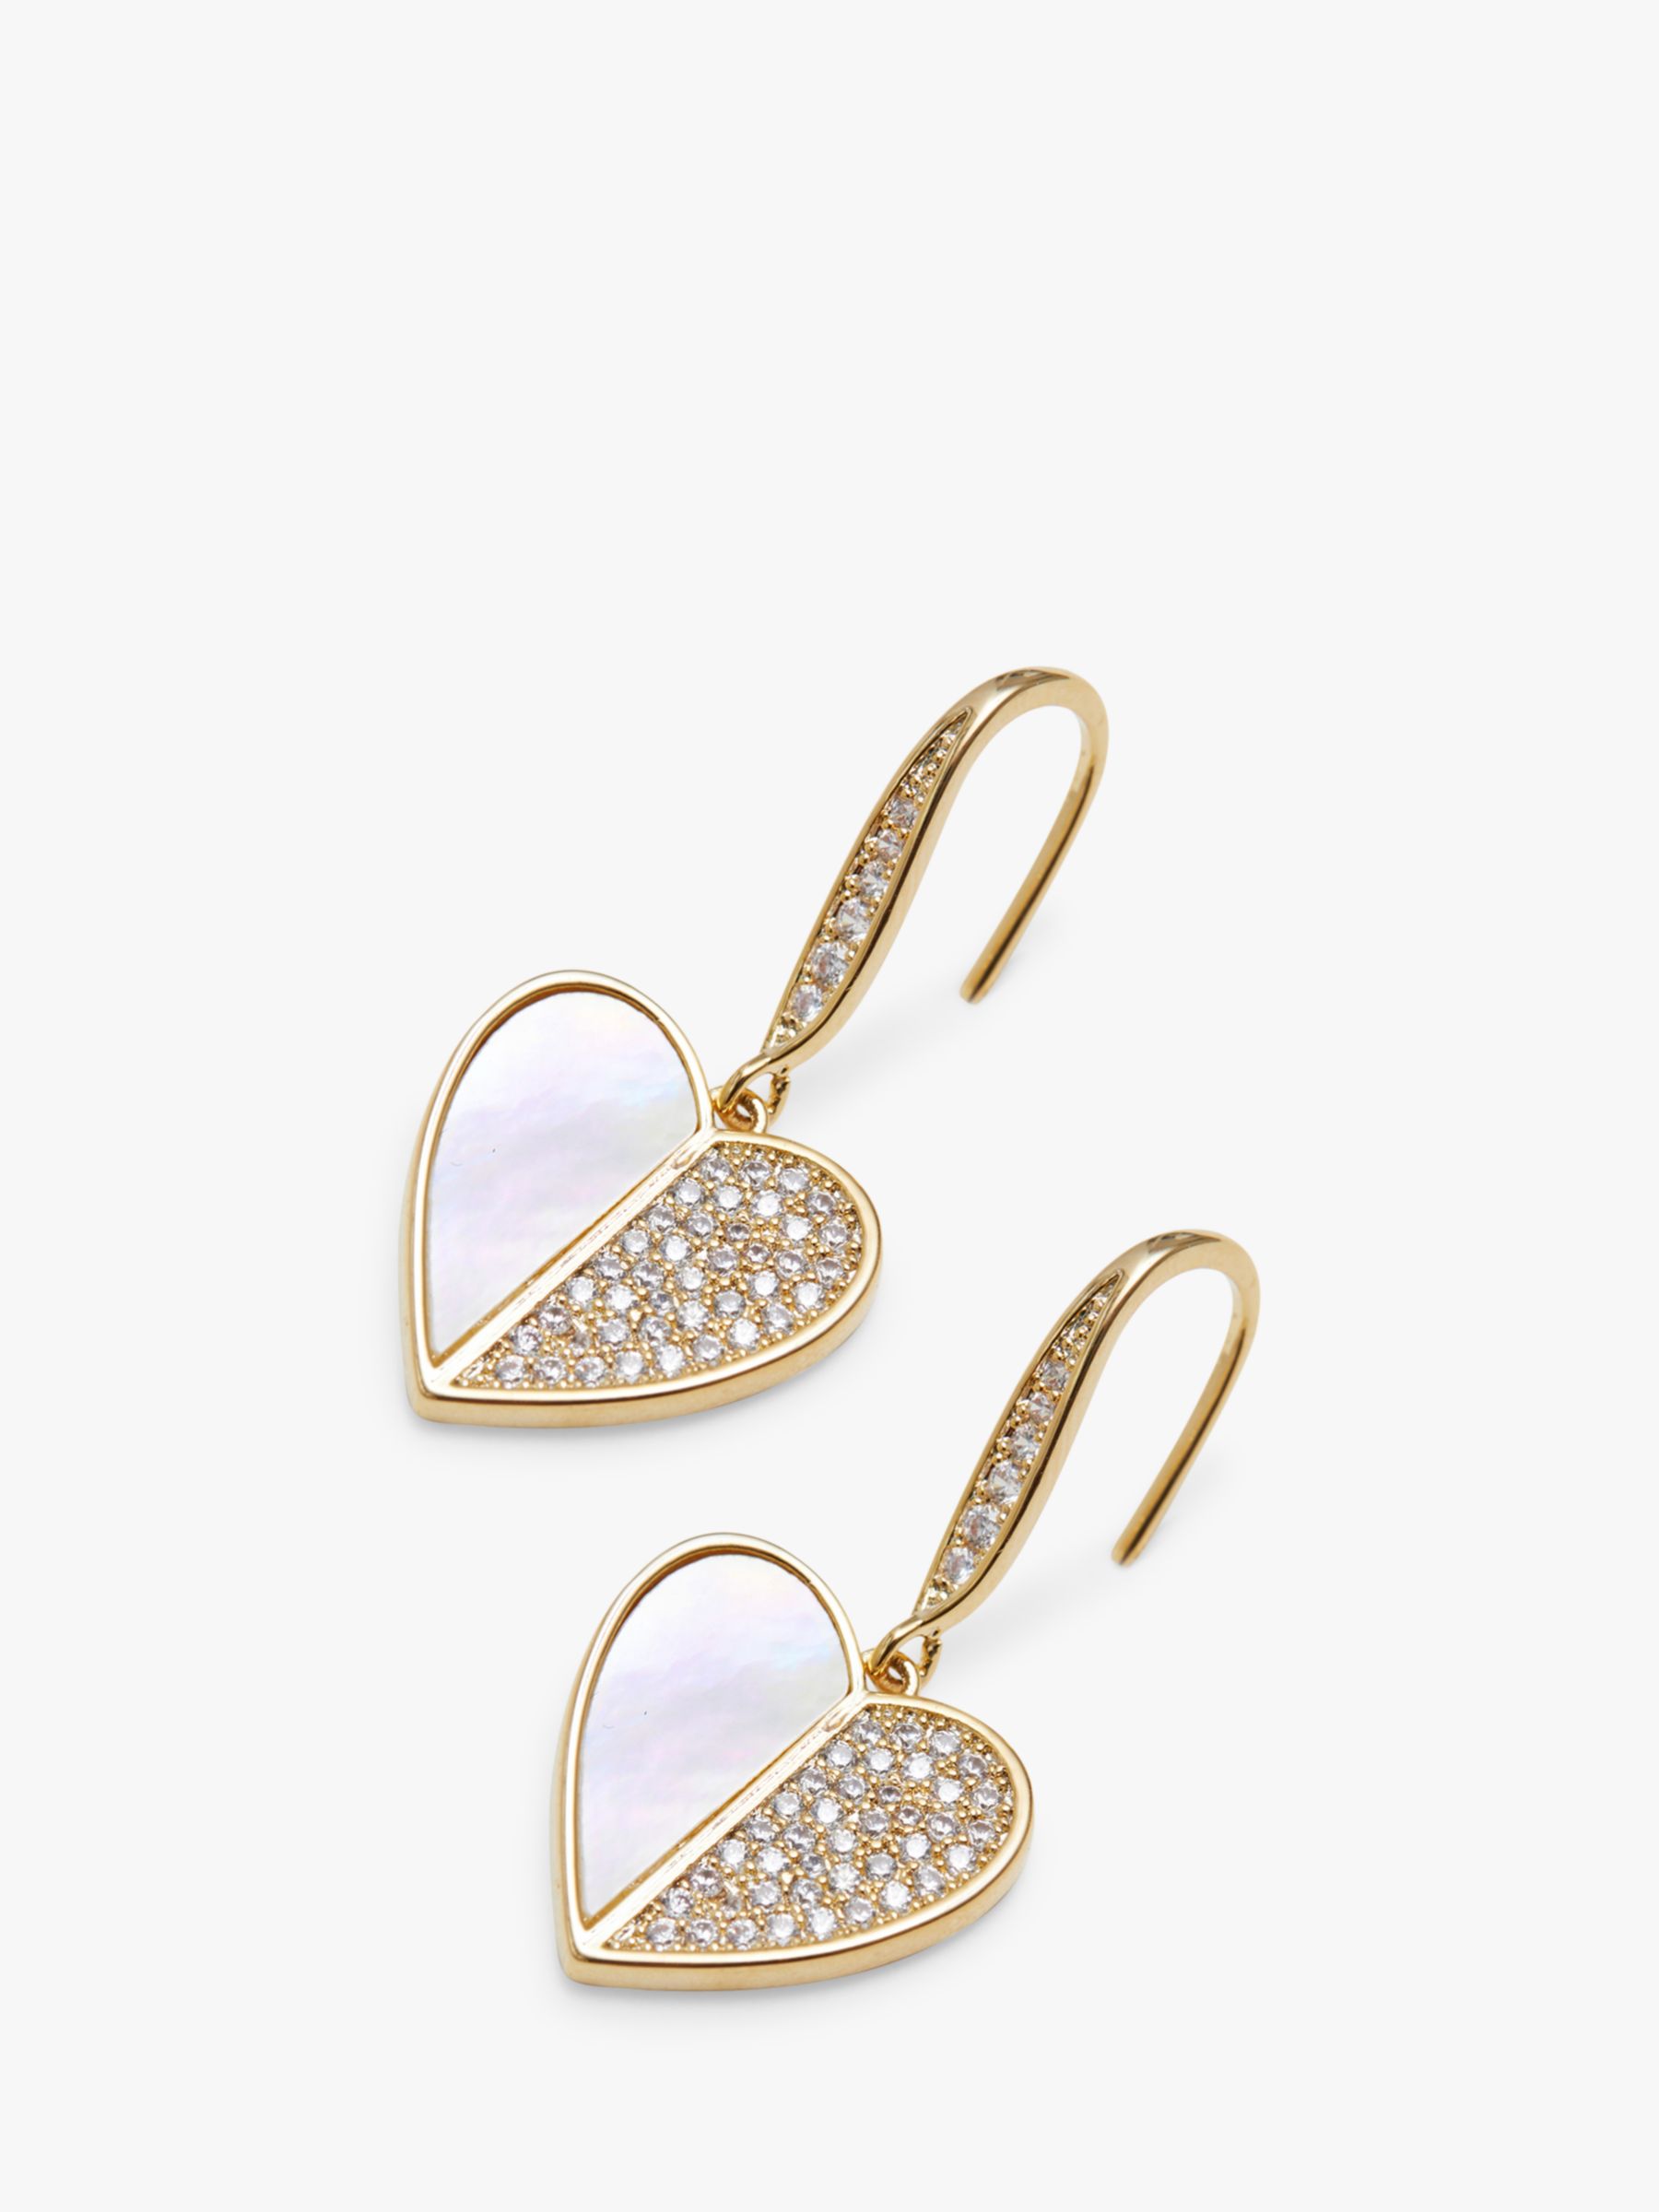 Buy Jon Richard Cubic Zirconia and Mother of Pearl Heart Drop Earrings, Gold Online at johnlewis.com